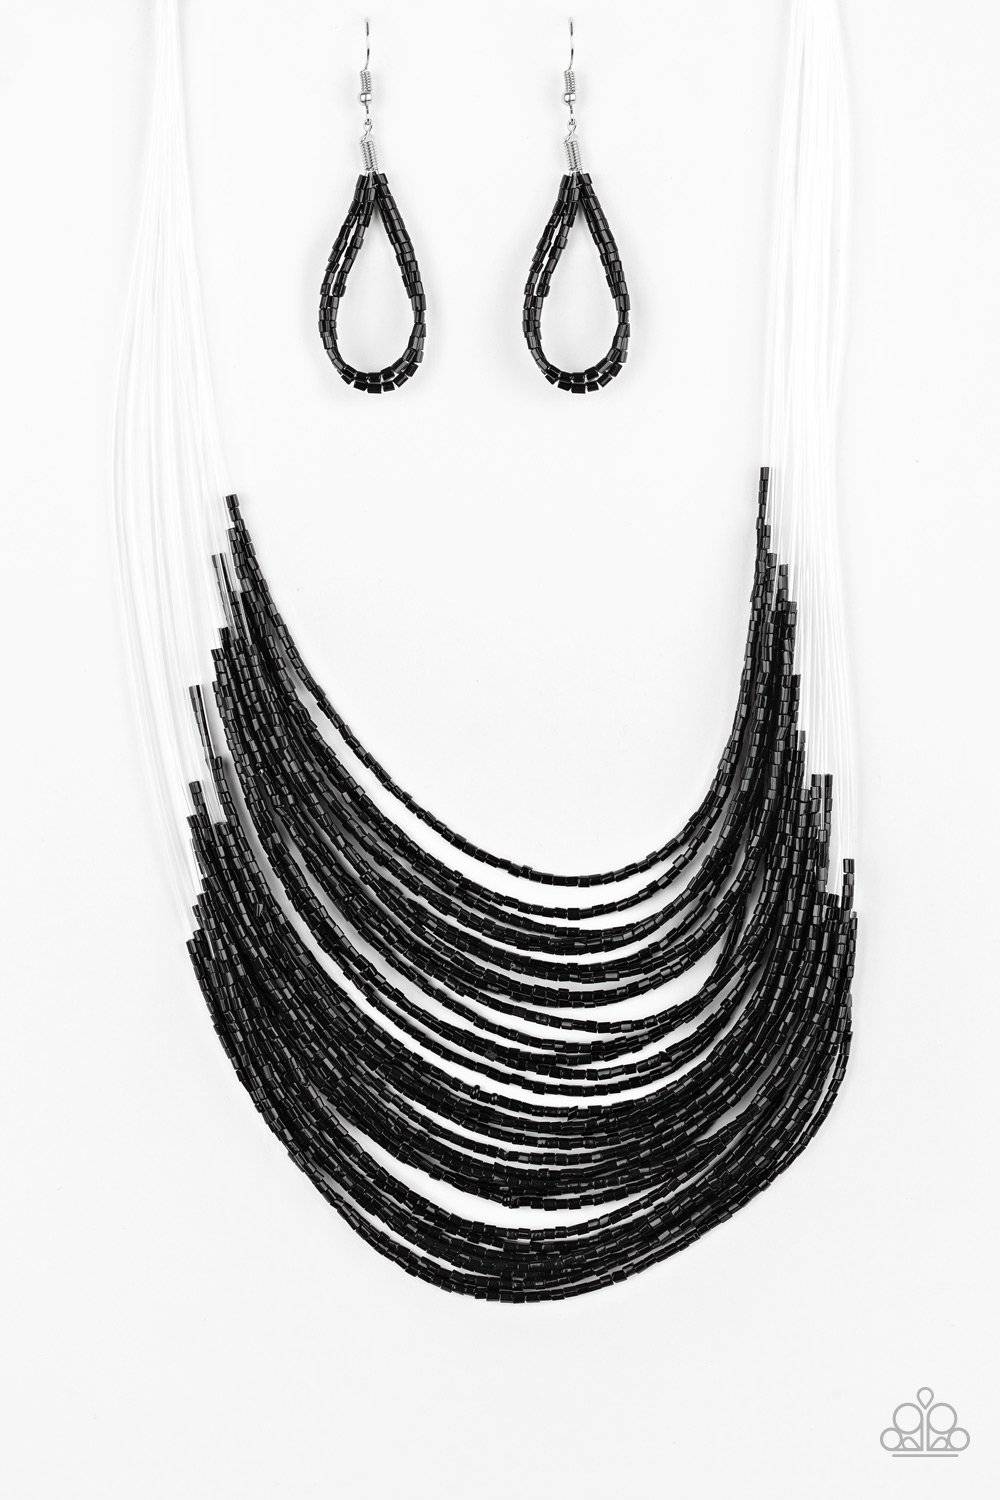 Catwalk Queen - Black Seed Bead Necklace - Paparazzi Accessories - GlaMarous Titi Jewels